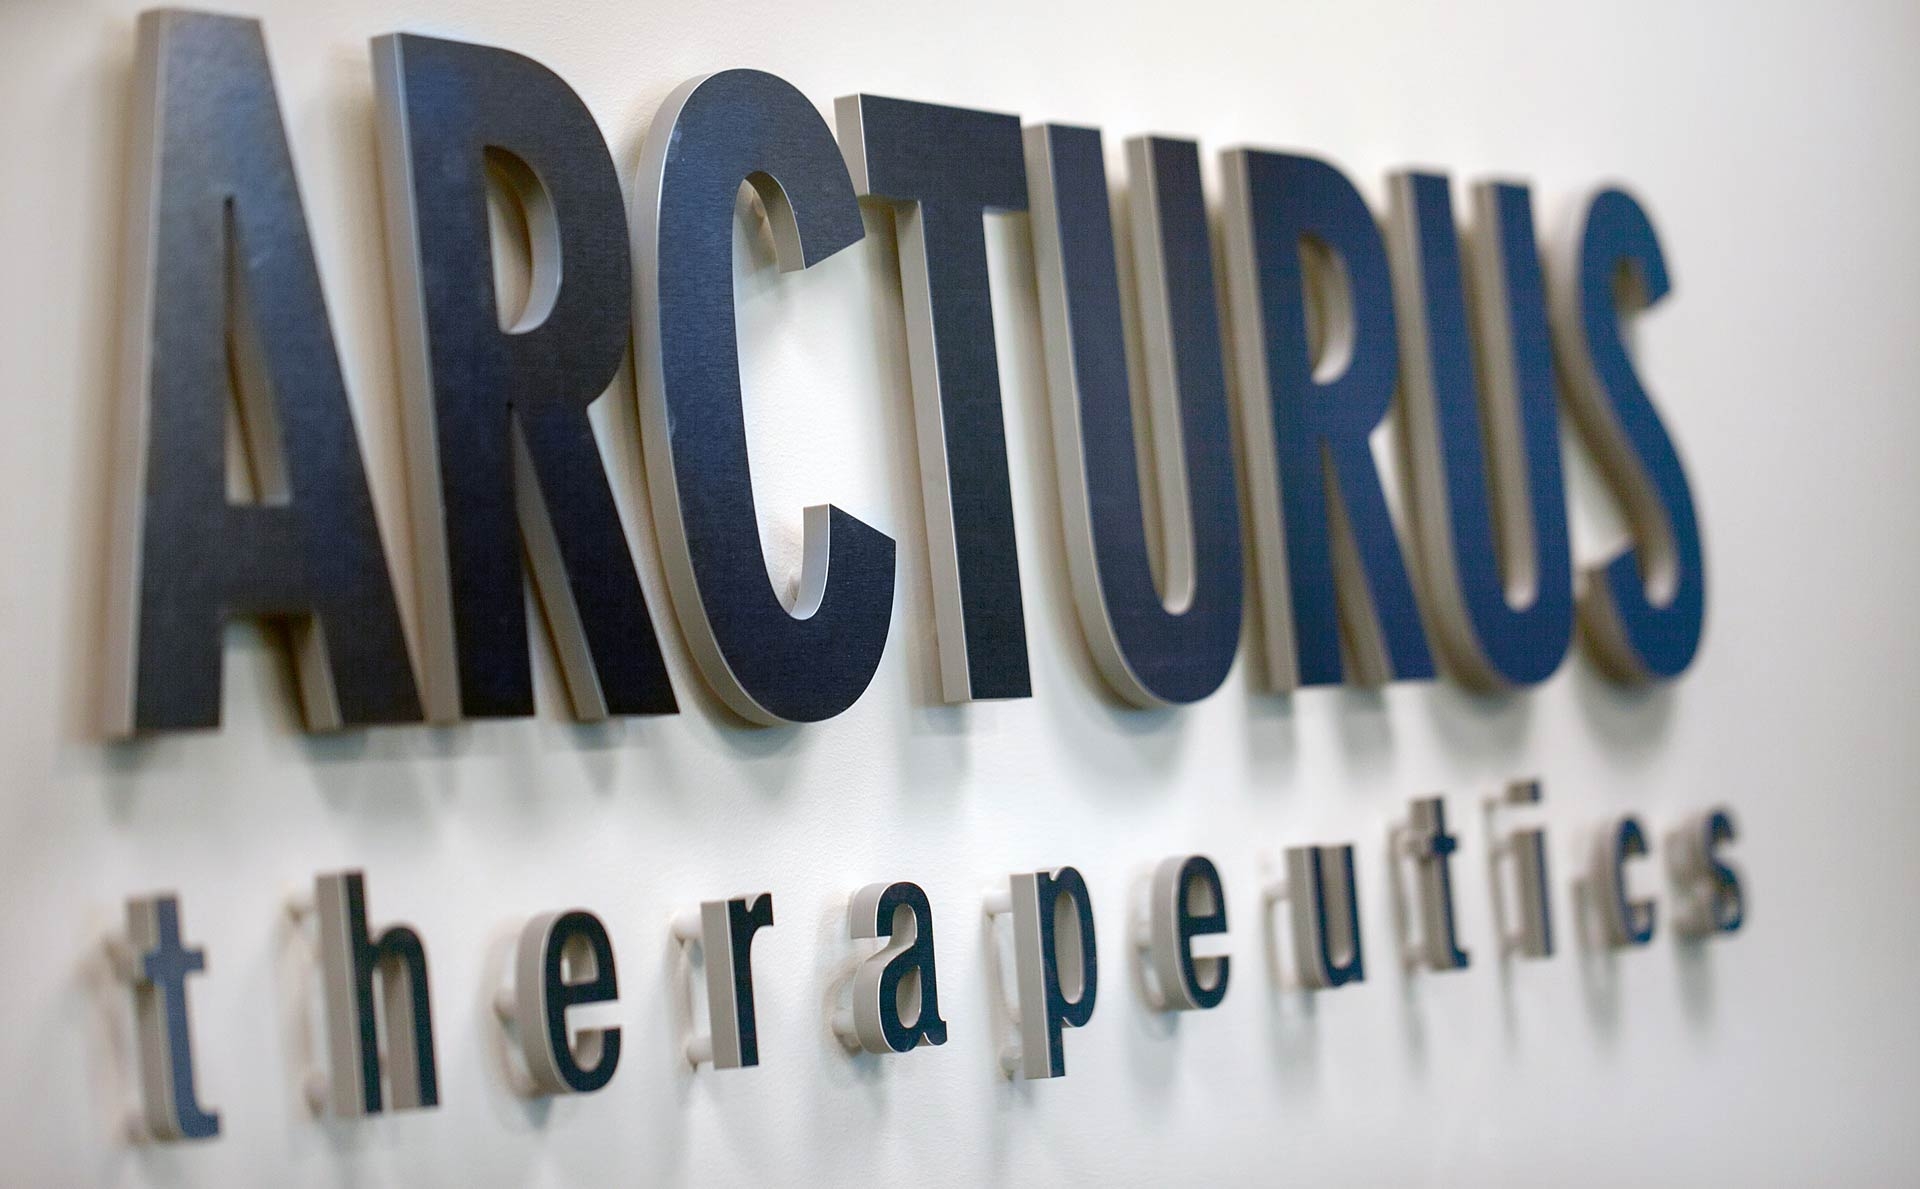 Arcturus Therapeutics ties up with Vingroup for vaccine manufacturing plant in Vietnam